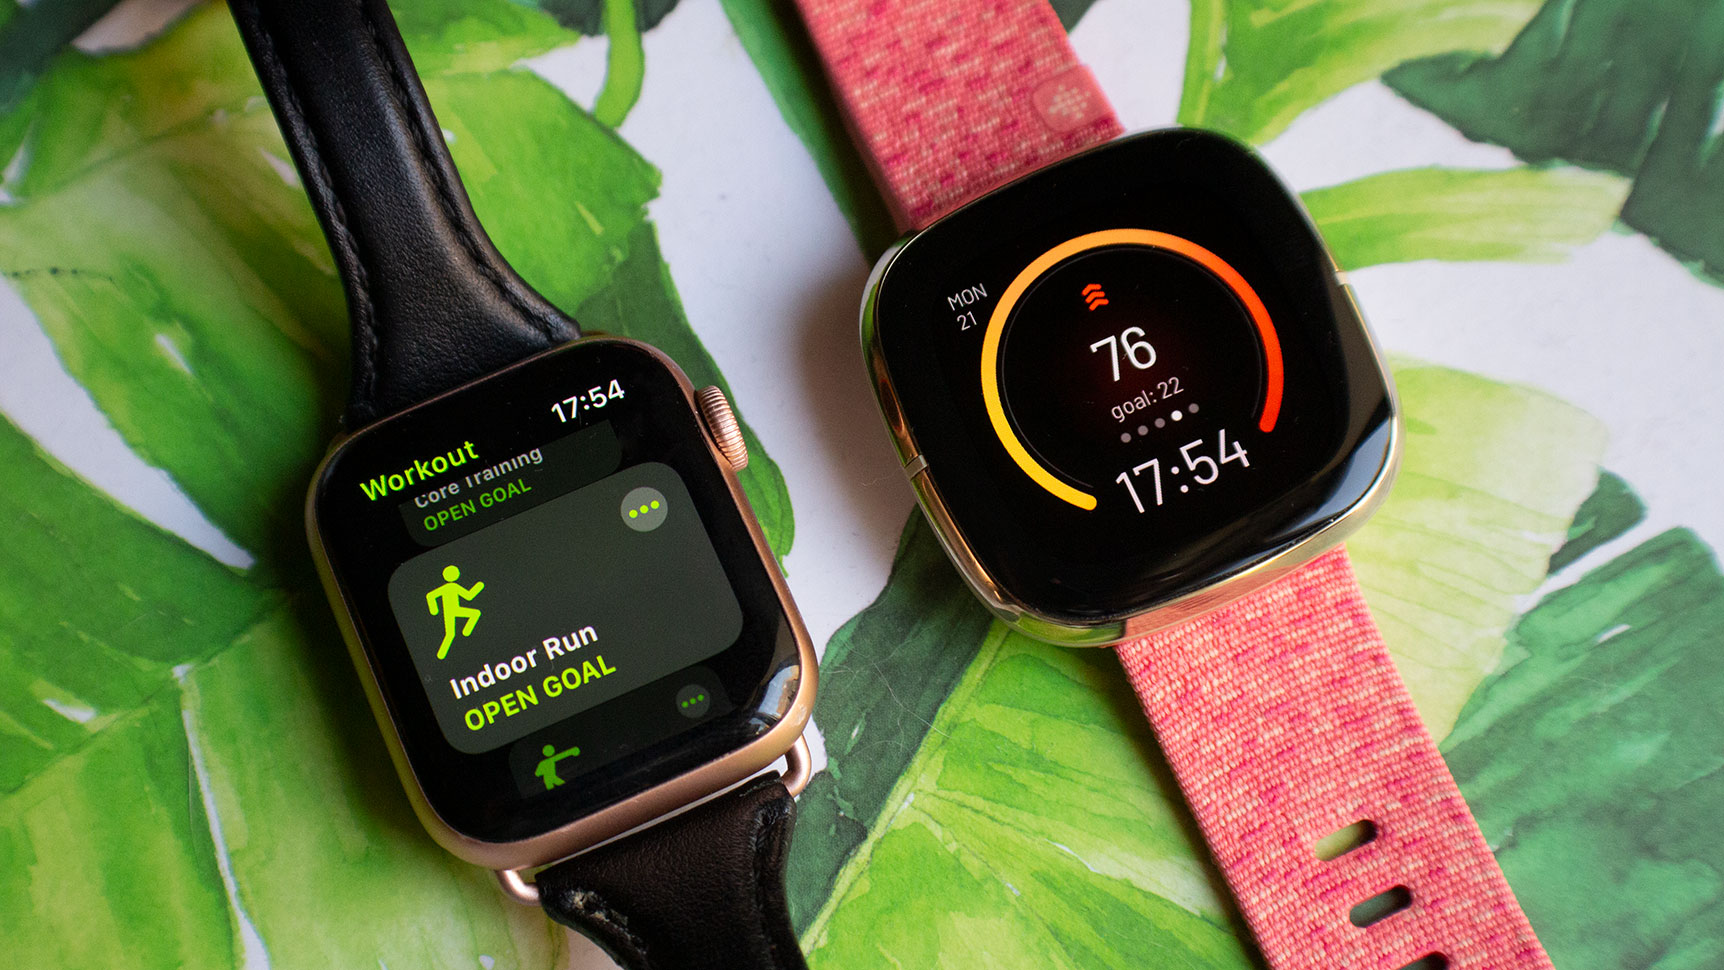 Apple Watch Series 5 on the left, the Fitbit Sense on the right. The designs are quite similar, though the Sense has a more squarish display.  (Photo: Victoria Song/Gizmodo)